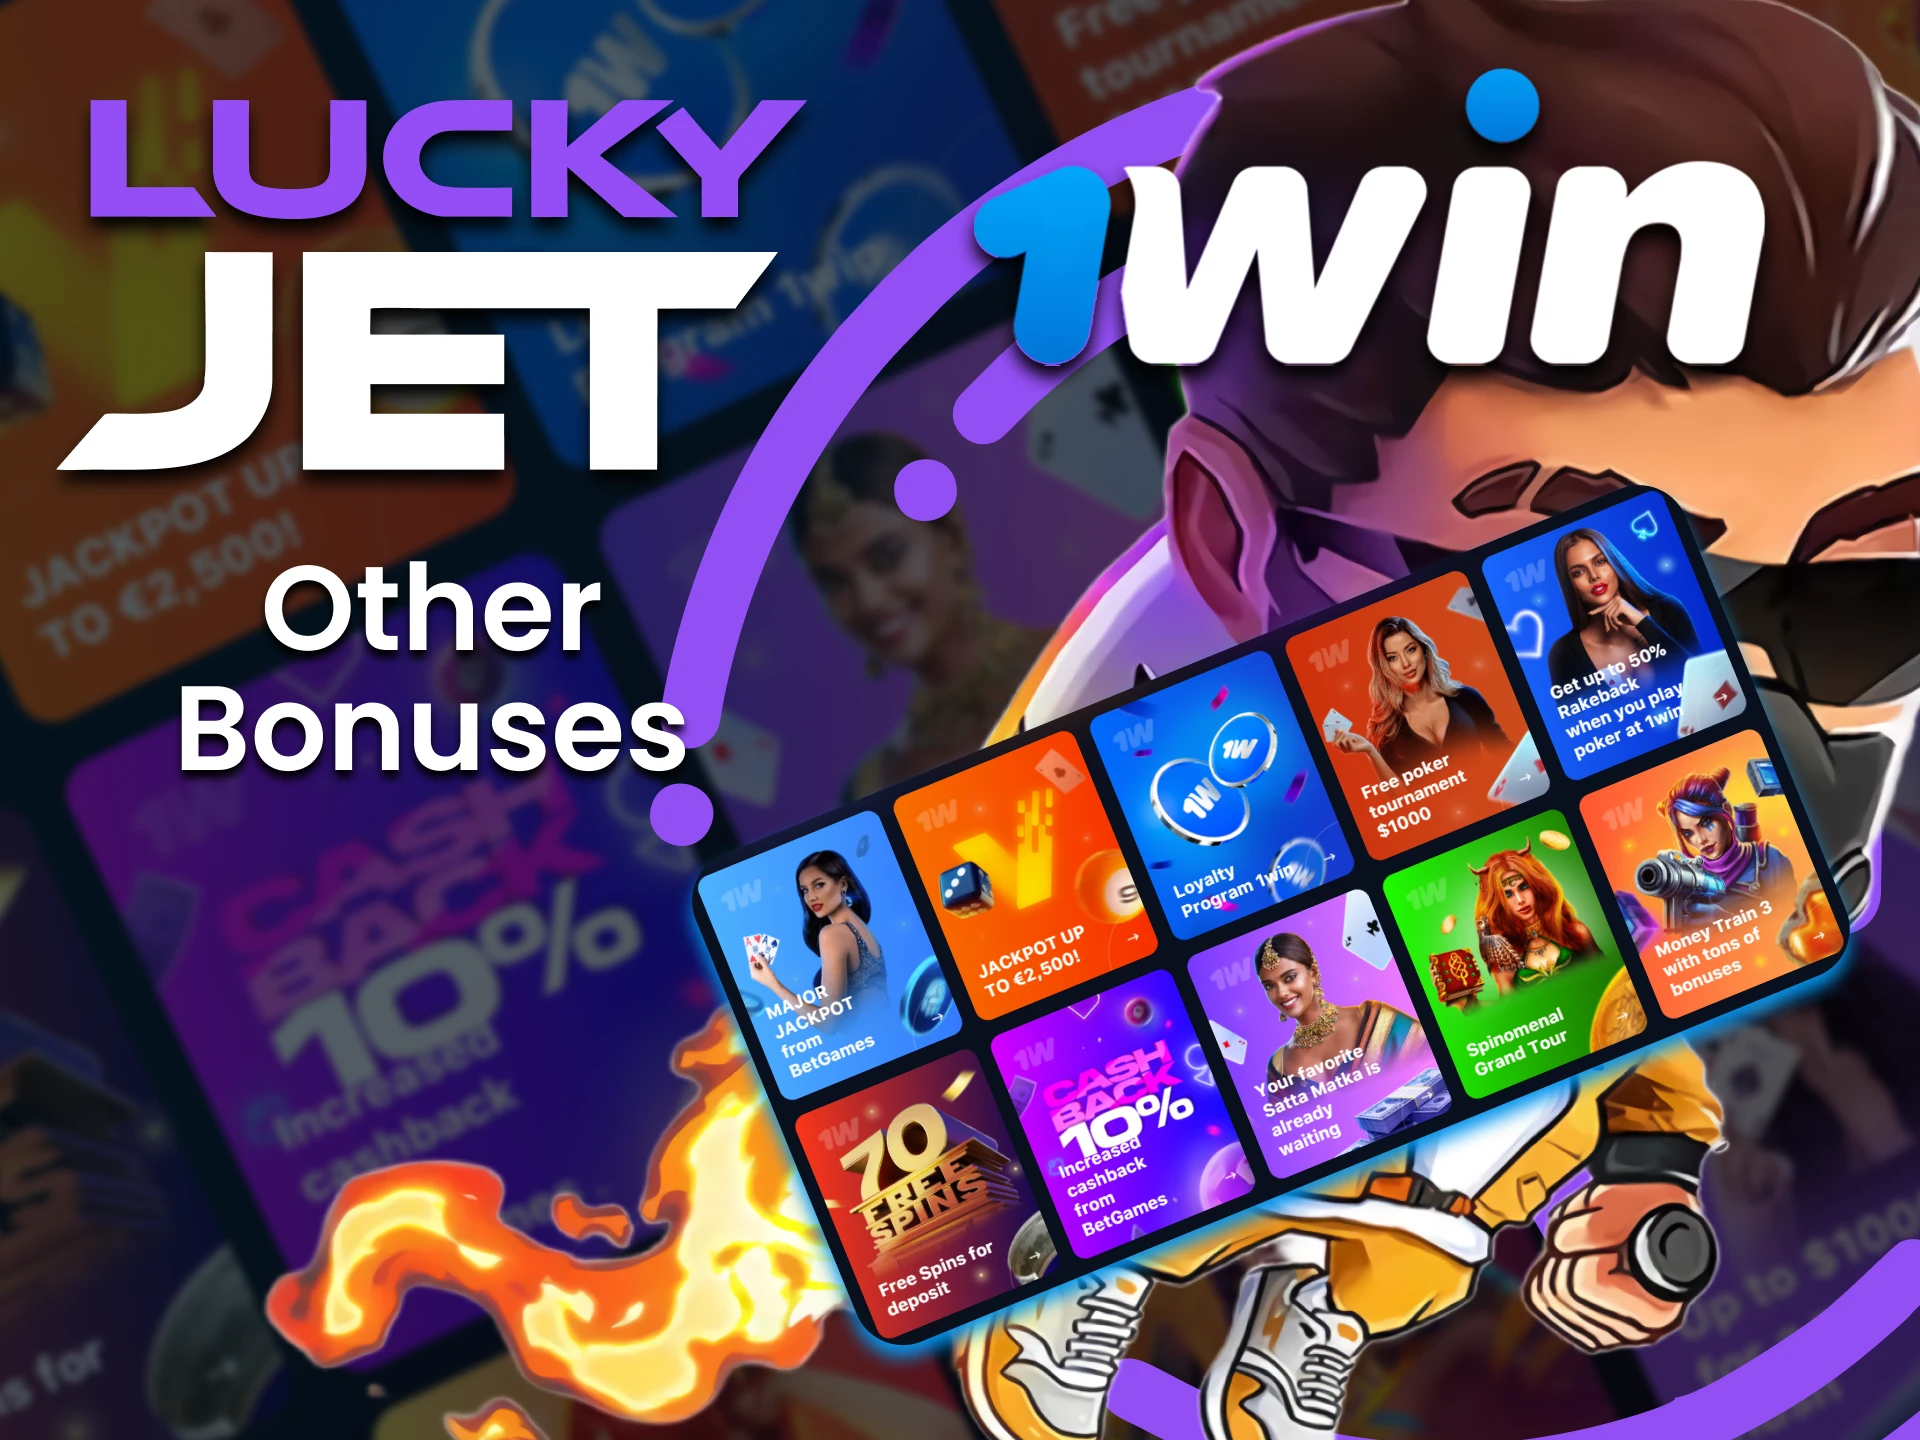 Get a lot of bonuses for playing Lucky Jet from 1win.